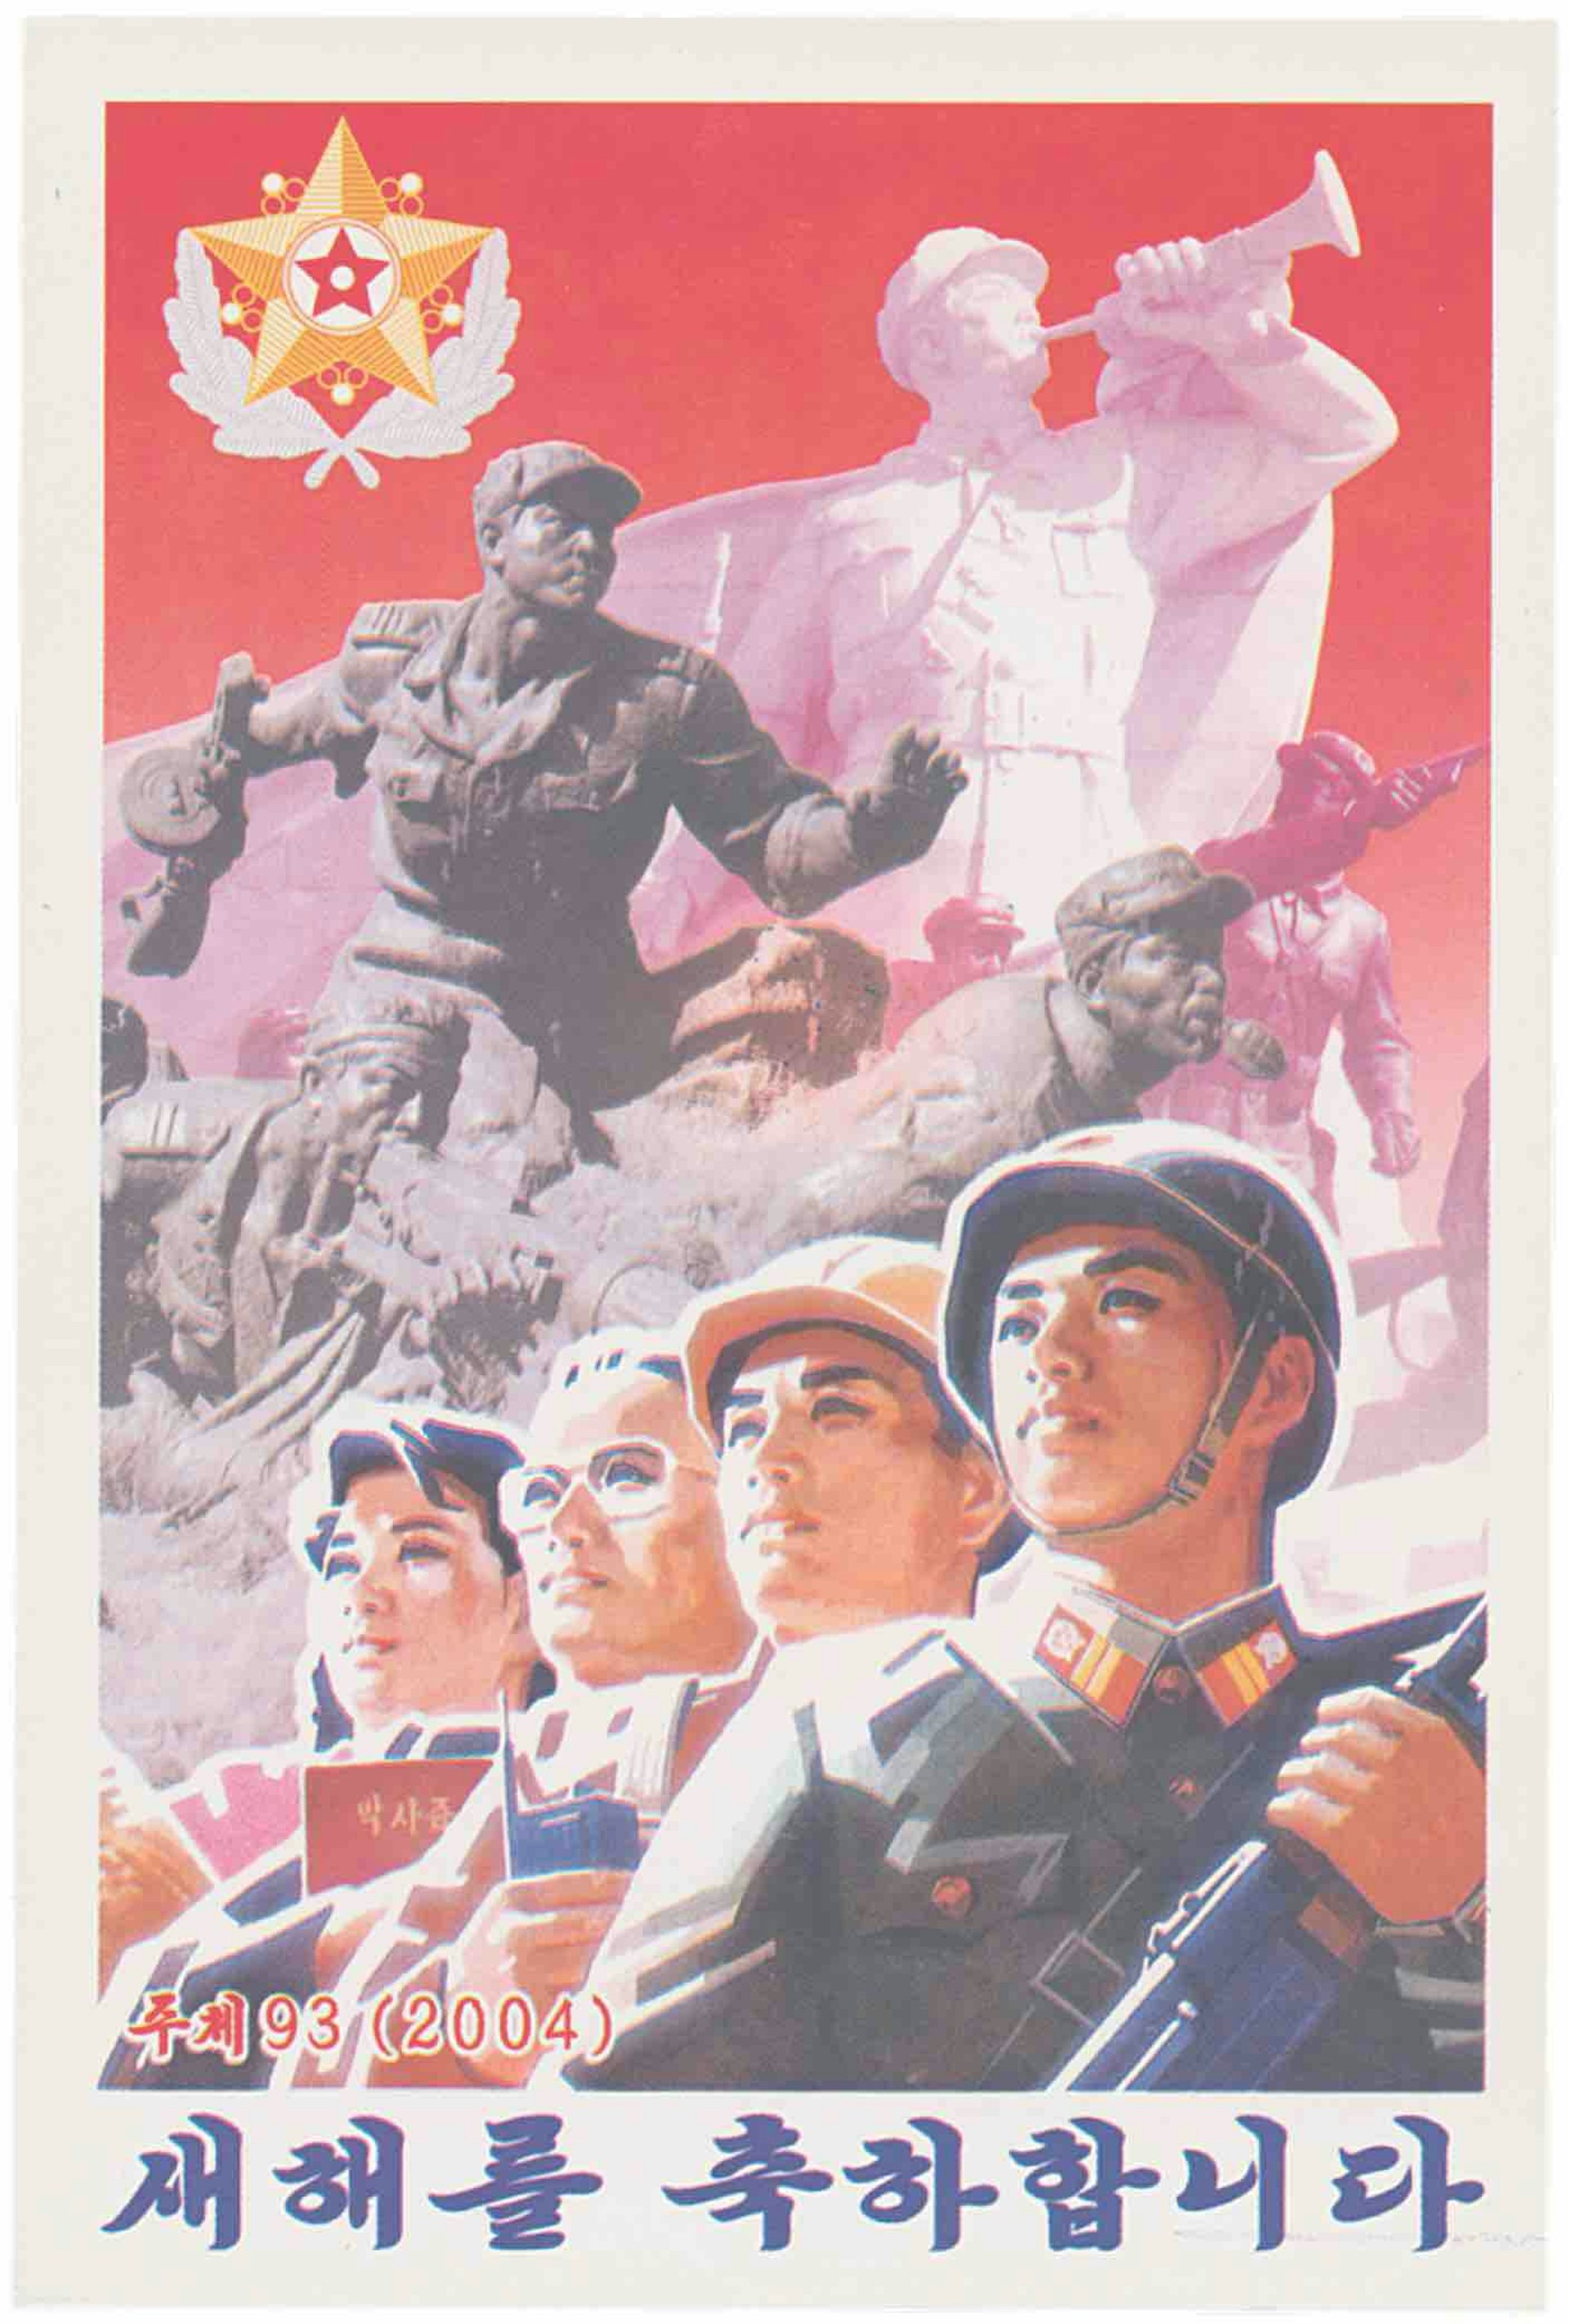 A New Year’s postcard from 2004 (Juche year 93) for use by members of the DPRK military services. The emblem (top left) is that of the ‘Supreme Commander’ (at that time Kim Jong Il). The card shows the various eras of military service. In the background the sculptures are of anti-Japanese guerrillas, then in the mid-ground ‘hero soldiers’ from the Korean War. In the foreground we see a contemporary soldier with members of the public (from left to right, a farmer, an intellectual and a worker) in unity. The slogan at the bottom reads: ‘Happy New Year’.